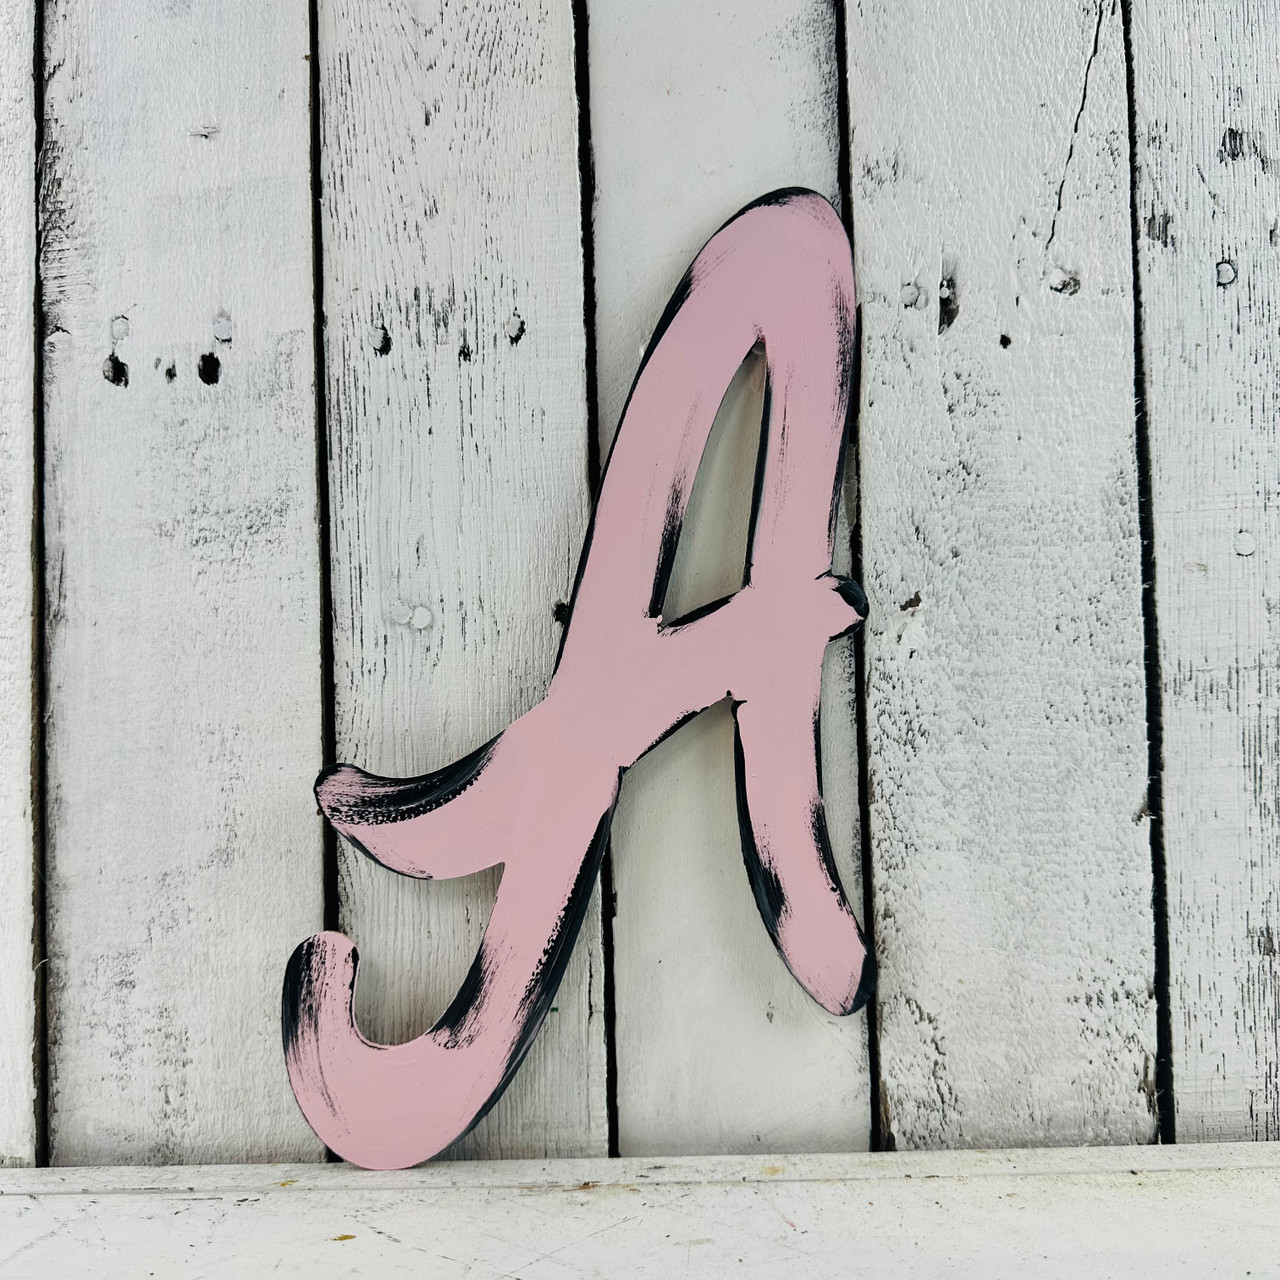 Cursive Wooden Letters J for Wall Decor 14 Inch Large Wooden Letters  Unfinished Monogram Wood Letter Crafts Alphabet Sign Cutouts for DIY  Painting